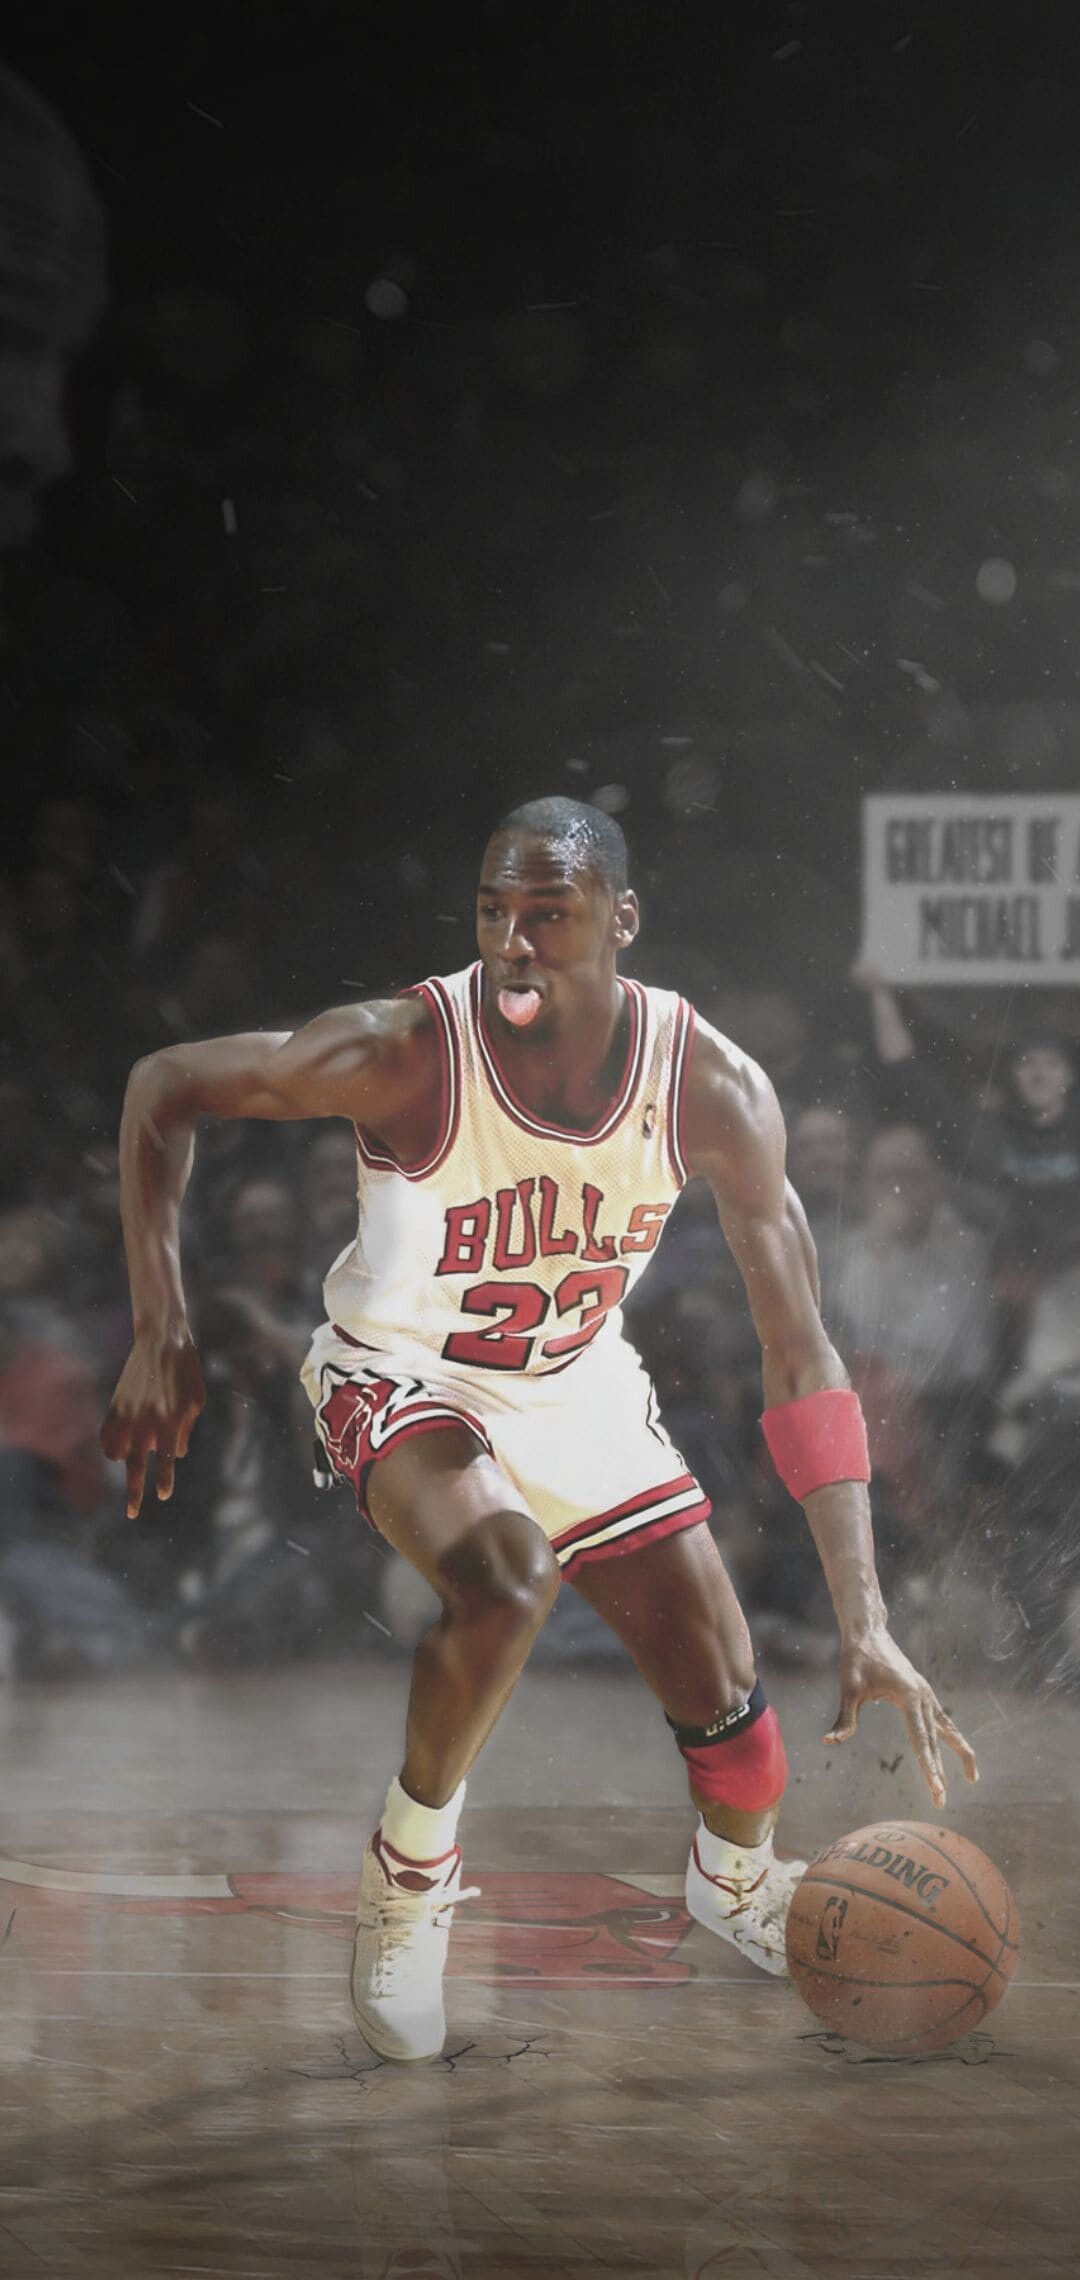 Michael Jordan: Was selected by the Chicago Bulls with the third overall pick of the 1984 NBA draft. 1080x2280 HD Wallpaper.